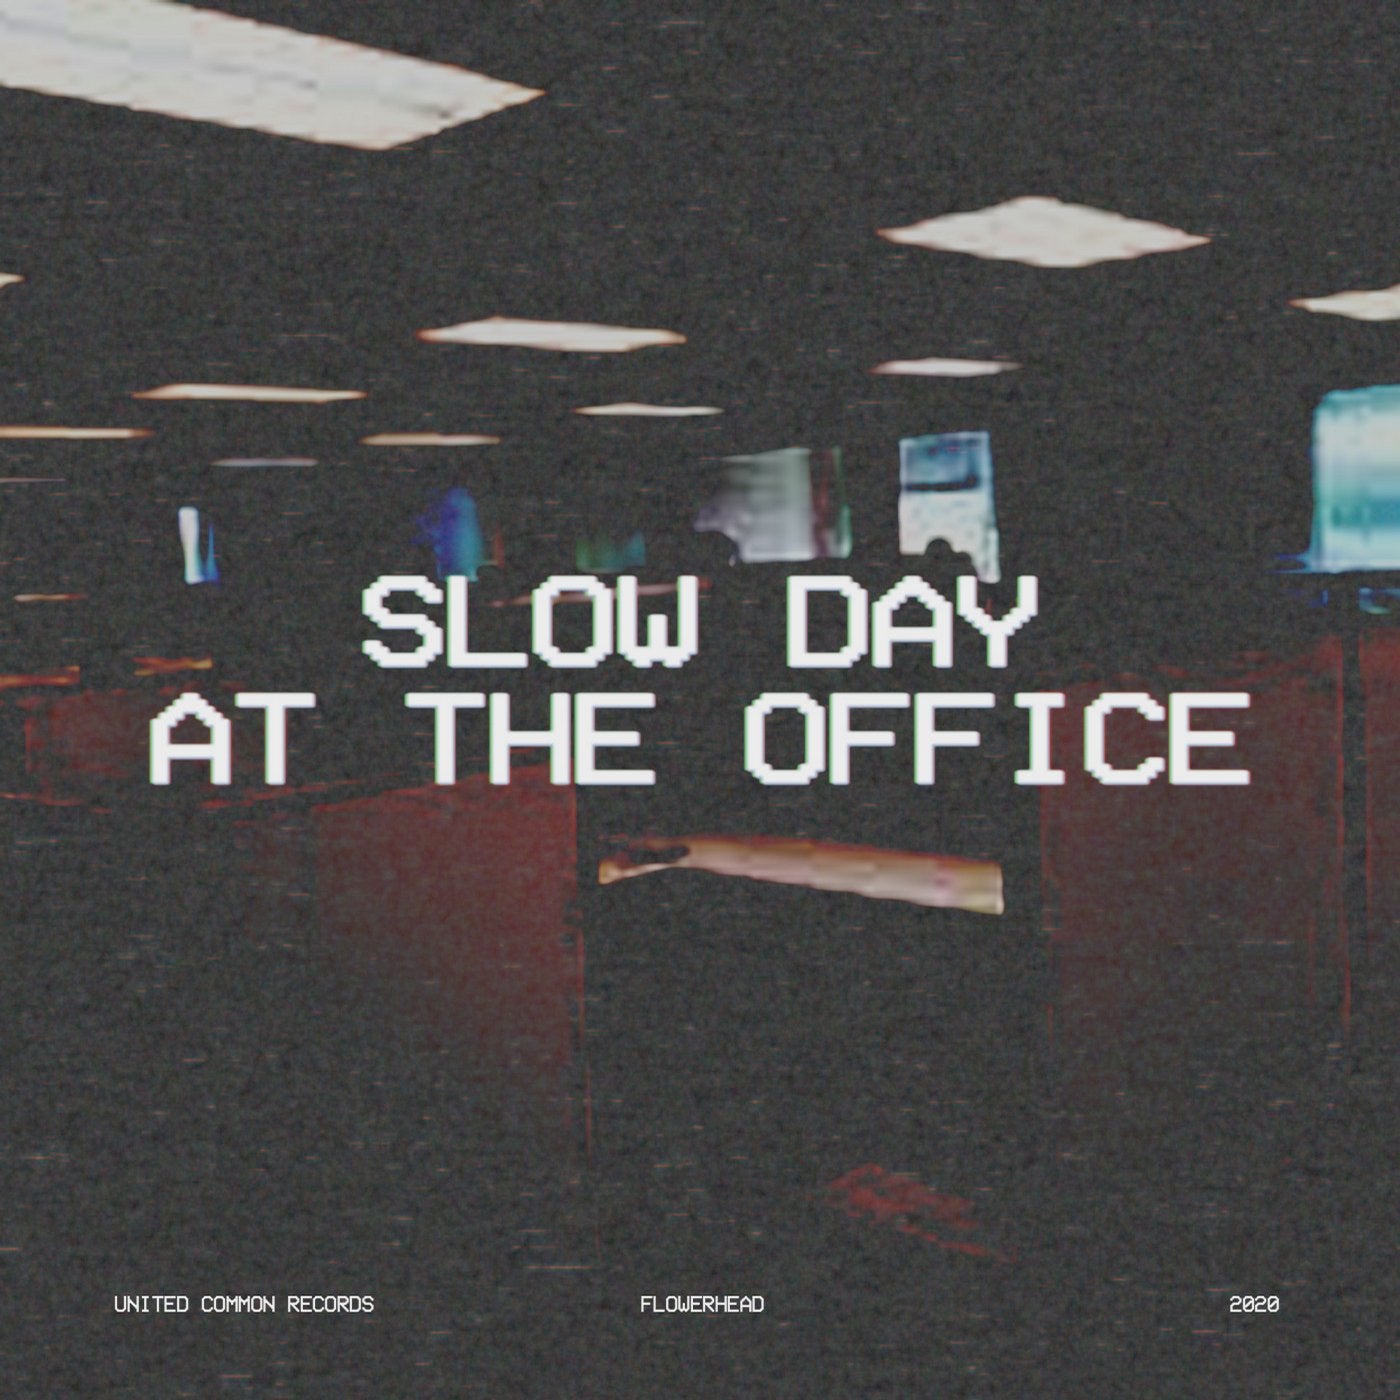 slow day at the office (Original Mix) by flowerhead on Beatport